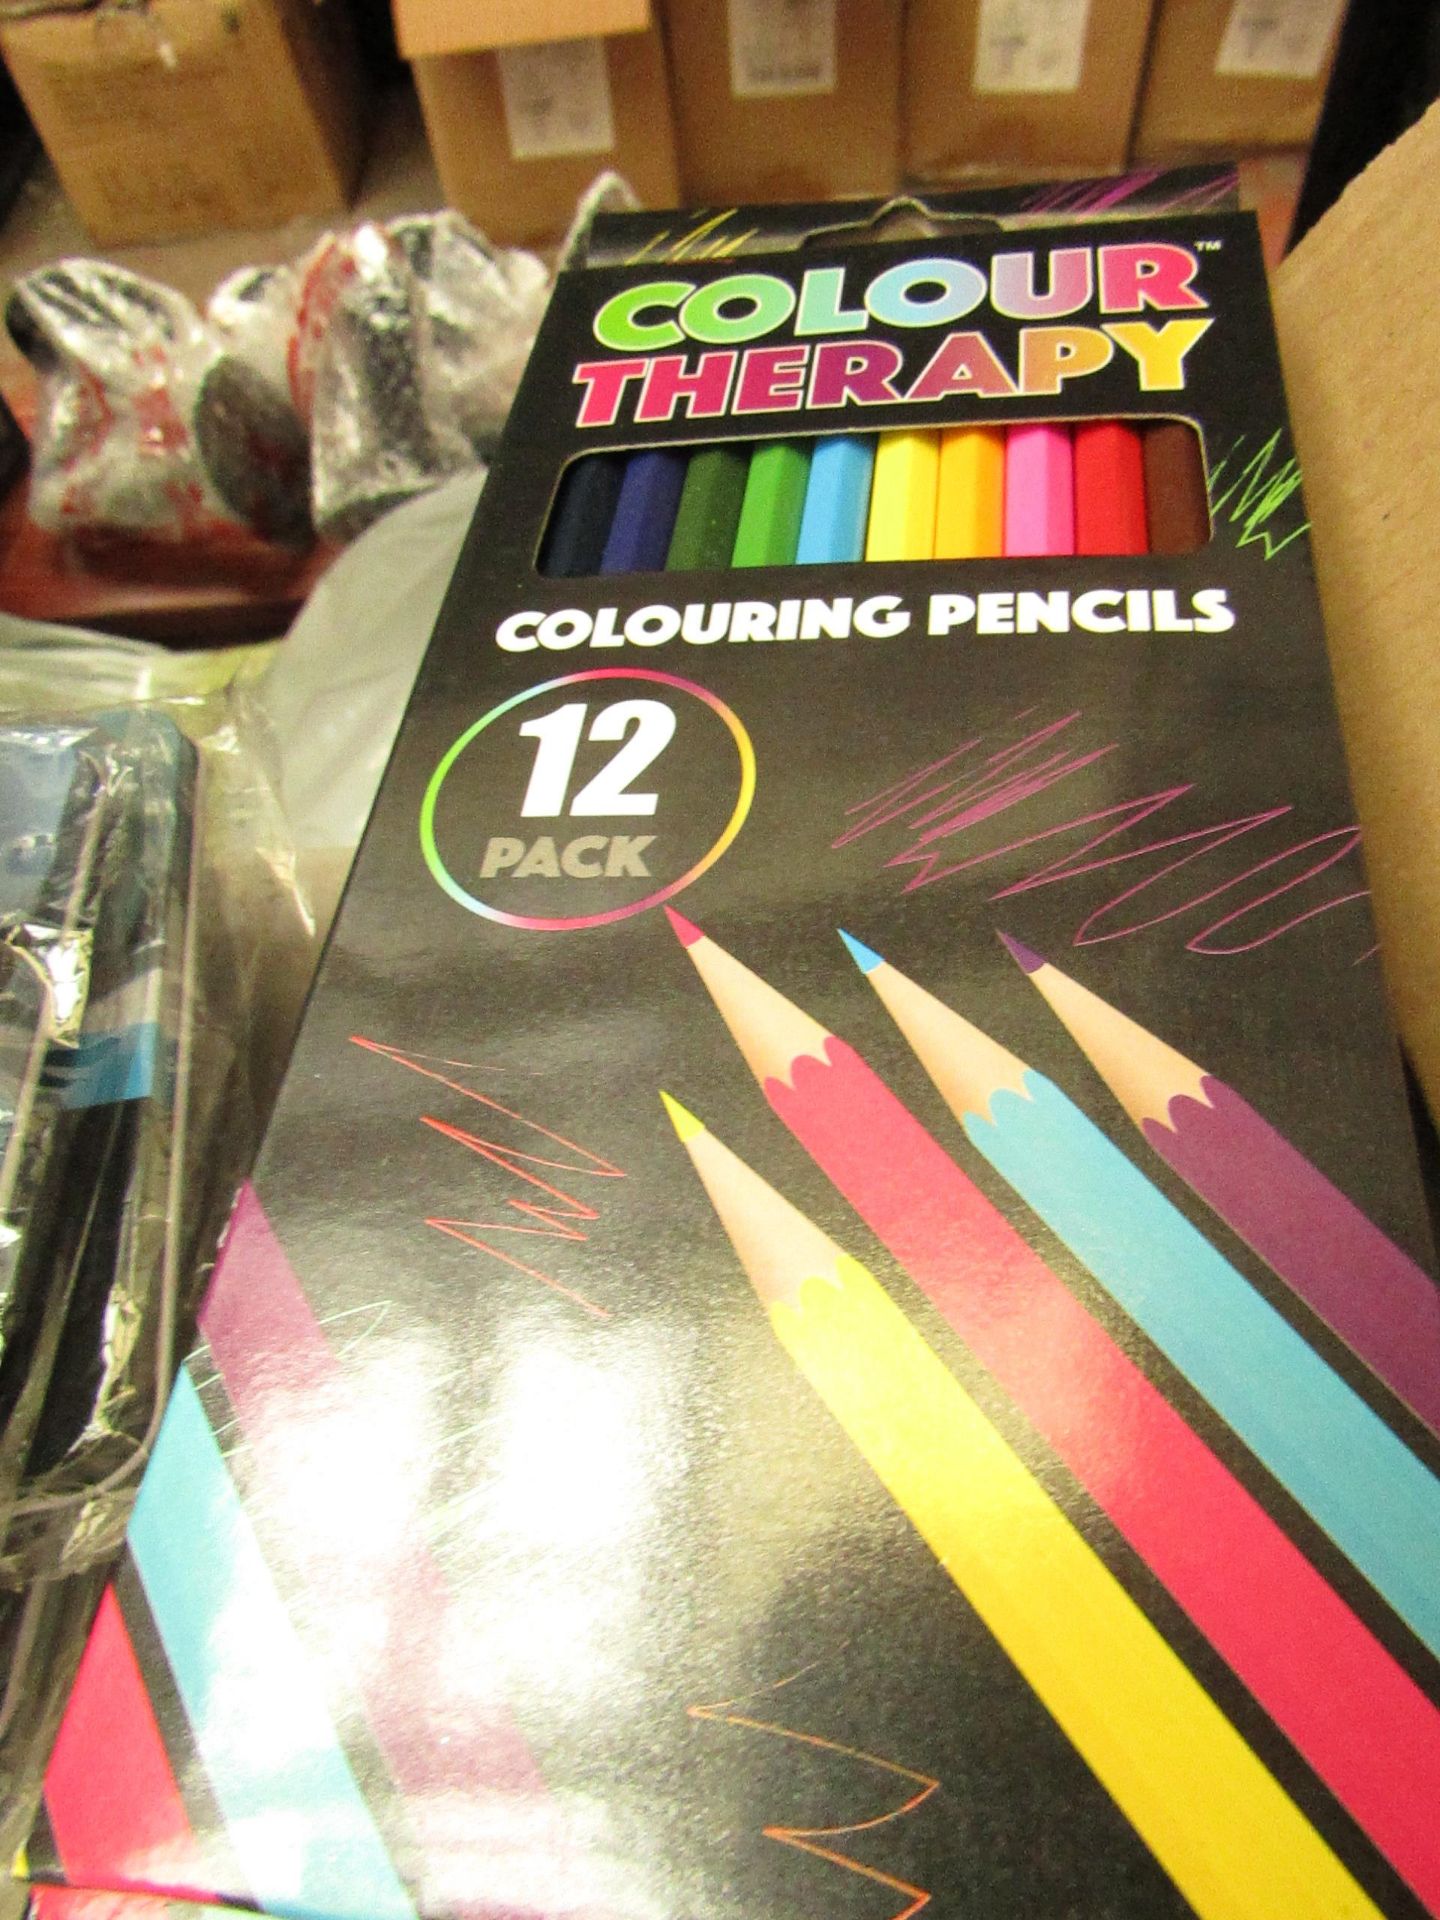 7 x packs of 12 per pack Colour Therapy Colouring Pencils &  20 x Letraset Charcoal Pencils new